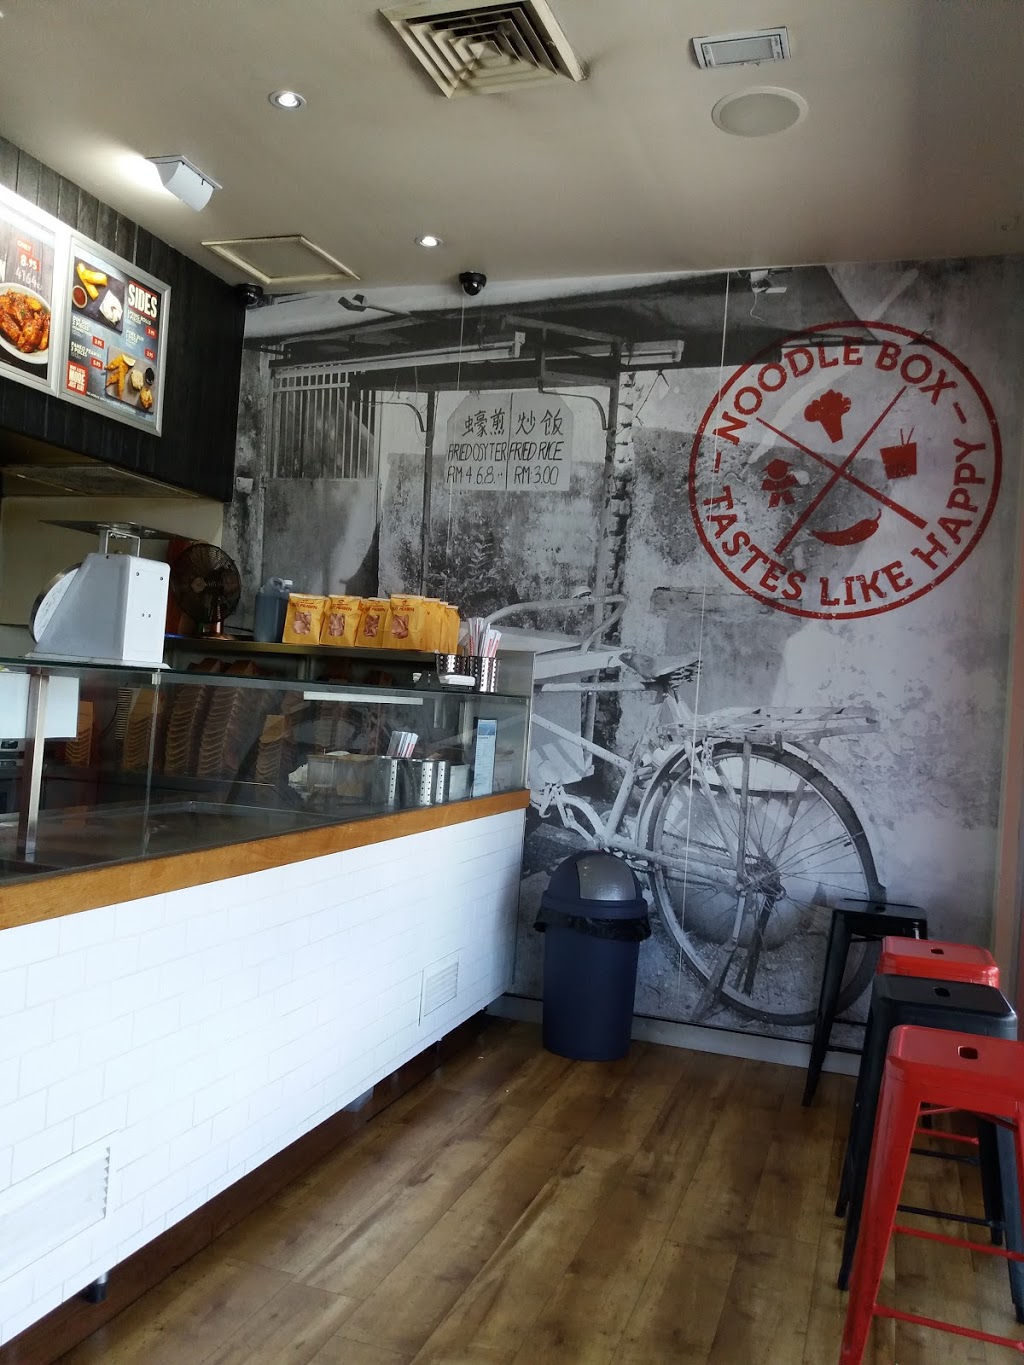 Noodle Box | restaurant | 170 Old Pacific Highway, Oxenford QLD 4210, Australia | 0756658088 OR +61 7 5665 8088